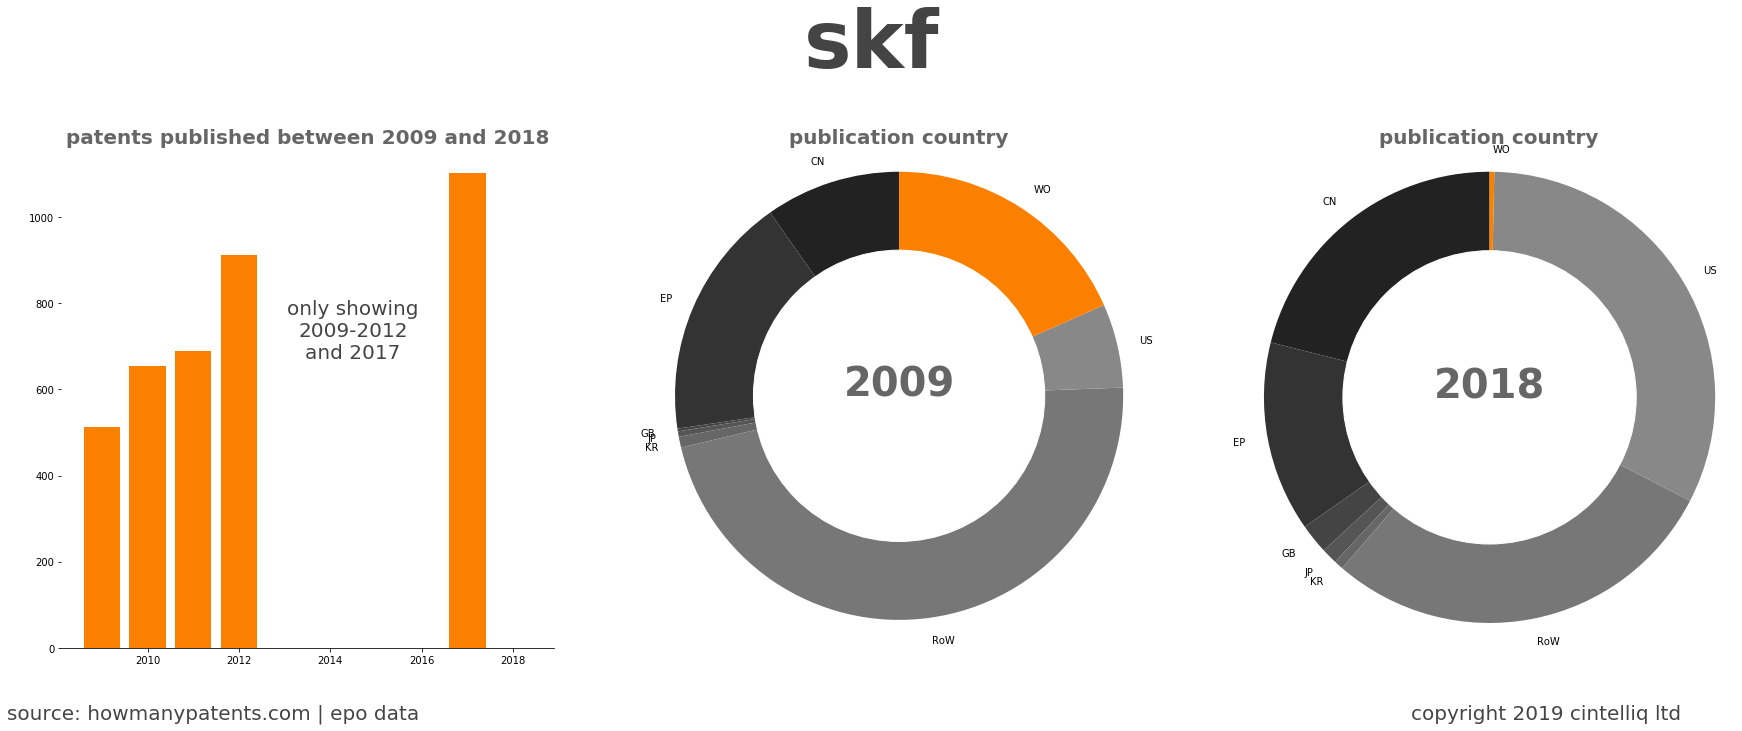 summary of patents for Skf